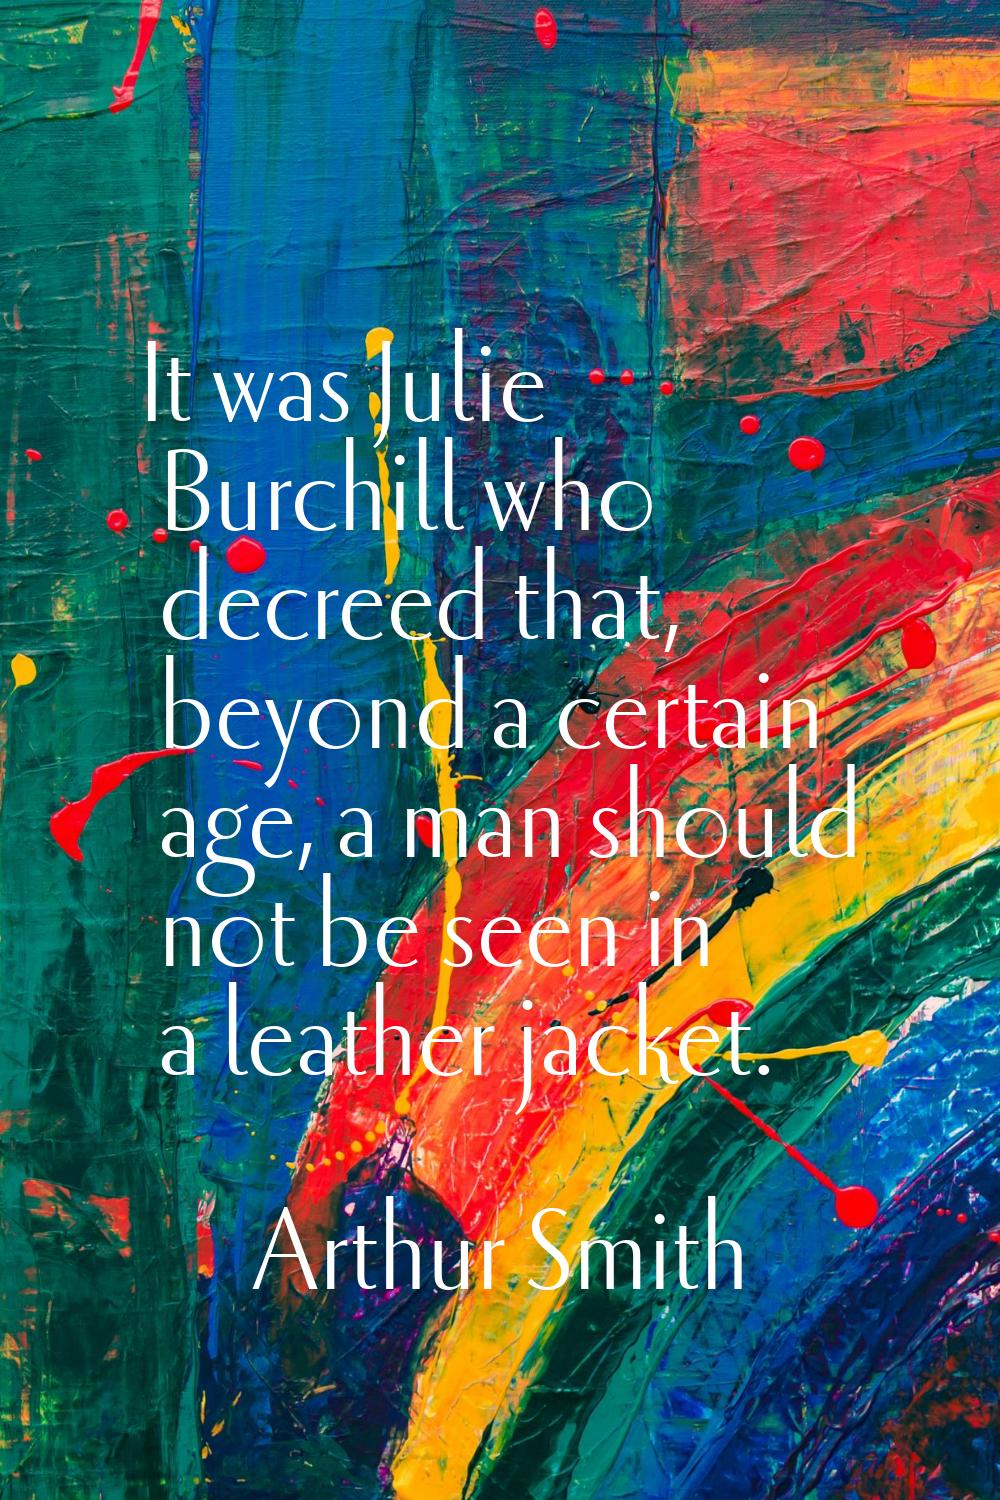 It was Julie Burchill who decreed that, beyond a certain age, a man should not be seen in a leather